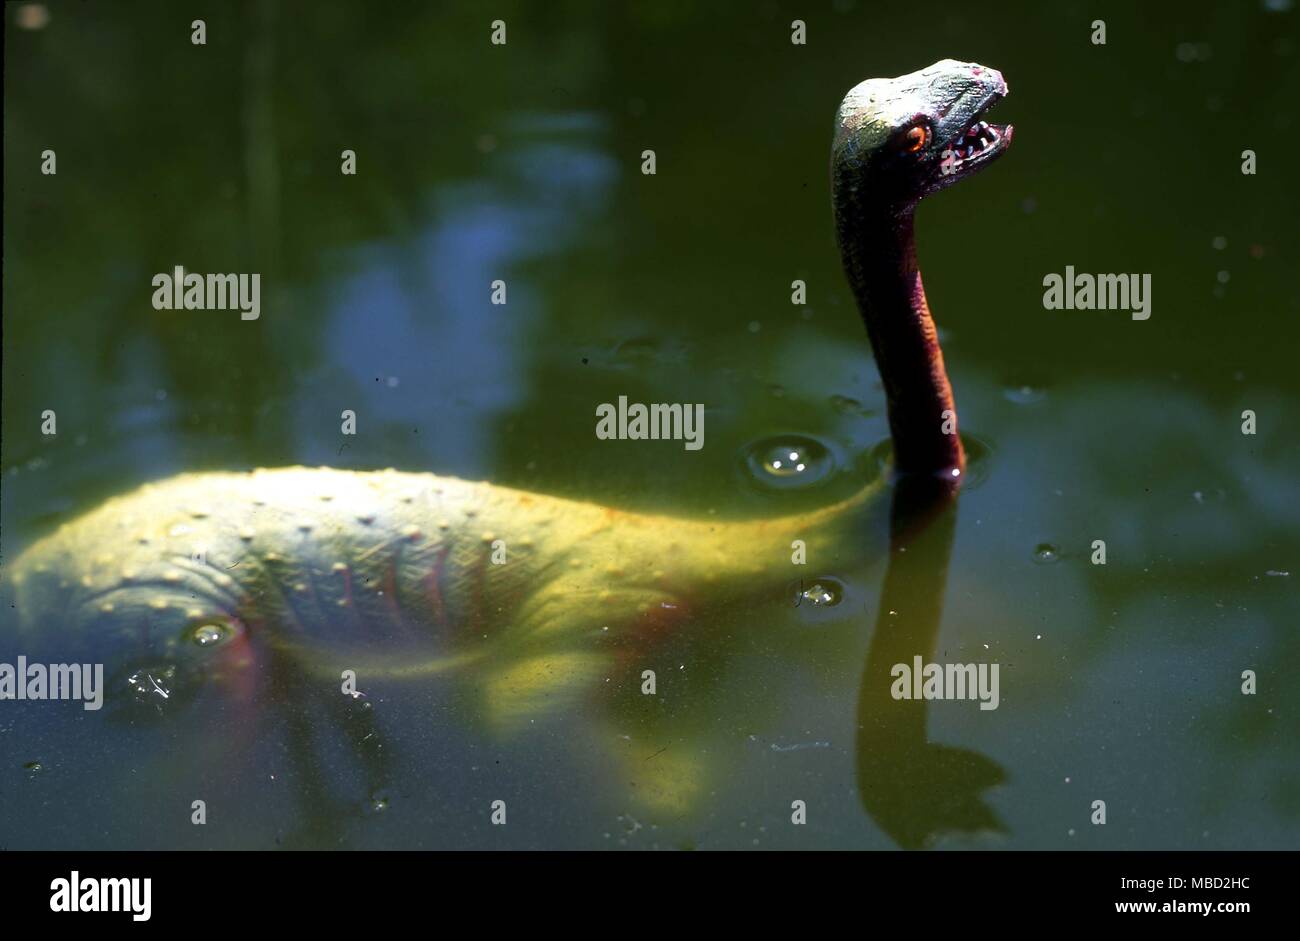 Model of the Loch Ness monster - Nessie - constructed from authenticated sightings. Stock Photo